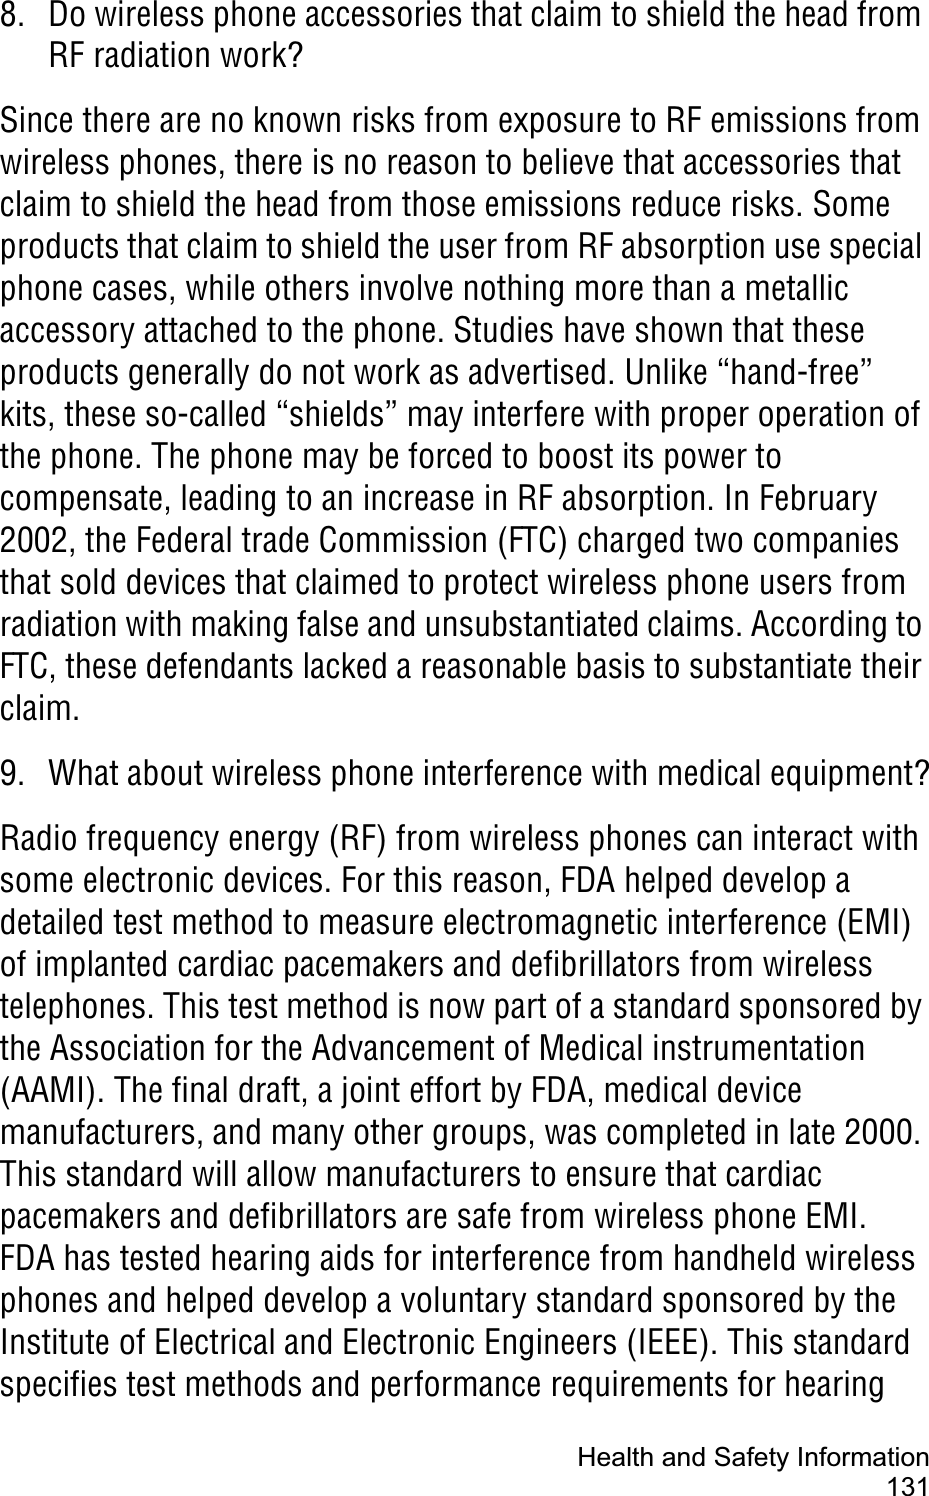 Health and Safety Information1318. Do wireless phone accessories that claim to shield the head from RF radiation work?Since there are no known risks from exposure to RF emissions from wireless phones, there is no reason to believe that accessories that claim to shield the head from those emissions reduce risks. Some products that claim to shield the user from RF absorption use special phone cases, while others involve nothing more than a metallic accessory attached to the phone. Studies have shown that these products generally do not work as advertised. Unlike “hand-free” kits, these so-called “shields” may interfere with proper operation of the phone. The phone may be forced to boost its power to compensate, leading to an increase in RF absorption. In February 2002, the Federal trade Commission (FTC) charged two companies that sold devices that claimed to protect wireless phone users from radiation with making false and unsubstantiated claims. According to FTC, these defendants lacked a reasonable basis to substantiate their claim.9. What about wireless phone interference with medical equipment?Radio frequency energy (RF) from wireless phones can interact with some electronic devices. For this reason, FDA helped develop a detailed test method to measure electromagnetic interference (EMI) of implanted cardiac pacemakers and defibrillators from wireless telephones. This test method is now part of a standard sponsored by the Association for the Advancement of Medical instrumentation (AAMI). The final draft, a joint effort by FDA, medical device manufacturers, and many other groups, was completed in late 2000. This standard will allow manufacturers to ensure that cardiac pacemakers and defibrillators are safe from wireless phone EMI.FDA has tested hearing aids for interference from handheld wireless phones and helped develop a voluntary standard sponsored by the Institute of Electrical and Electronic Engineers (IEEE). This standard specifies test methods and performance requirements for hearing 